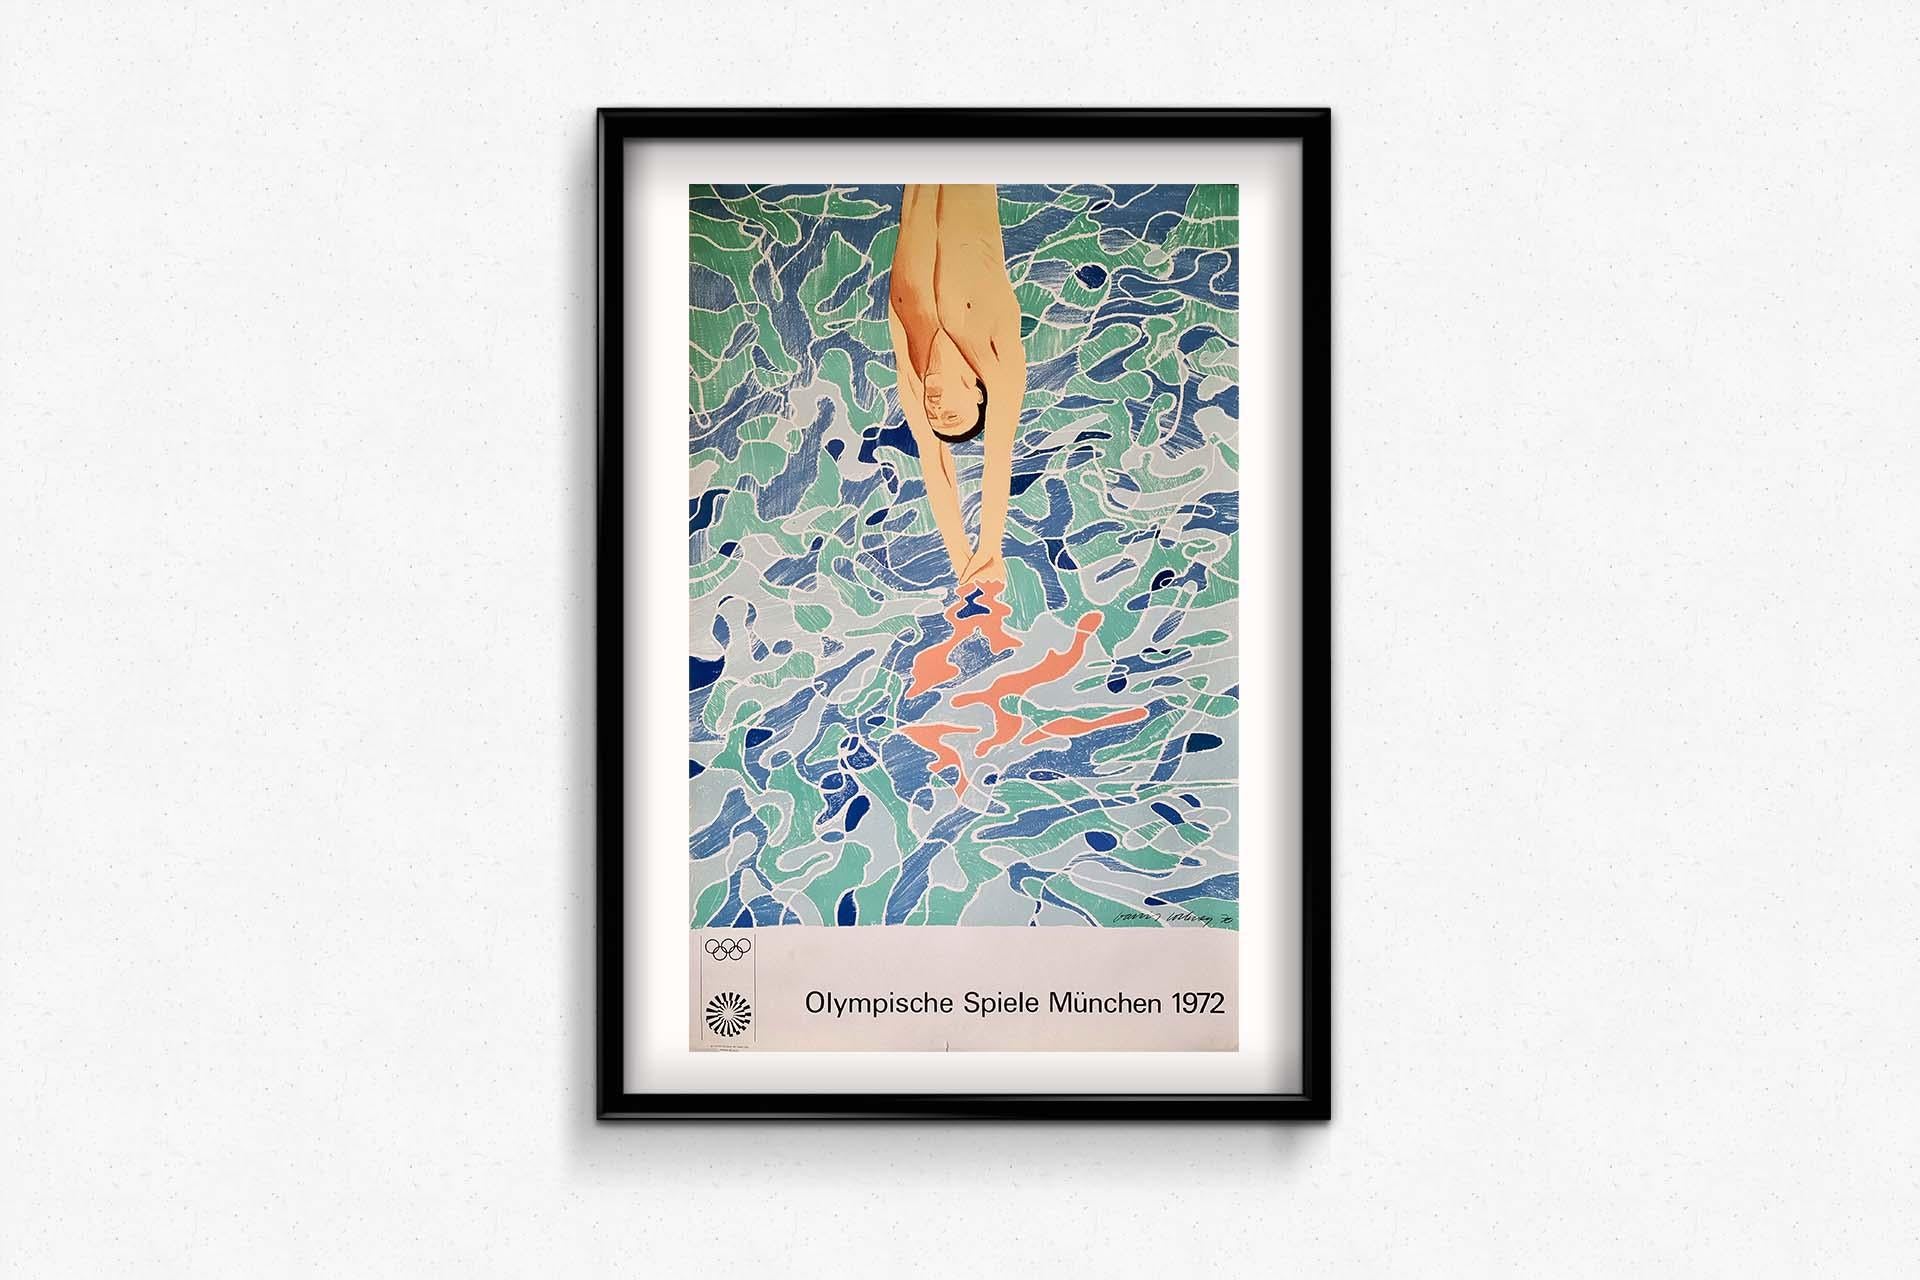 Original vintage poster advertising the 1972 Summer Olympics in Munich (Olympische Spiele Munchen). Limited edition.

This Munich Olympic poster featuring a diver and signed in print by the artist David Hockney is one of the series of posters by